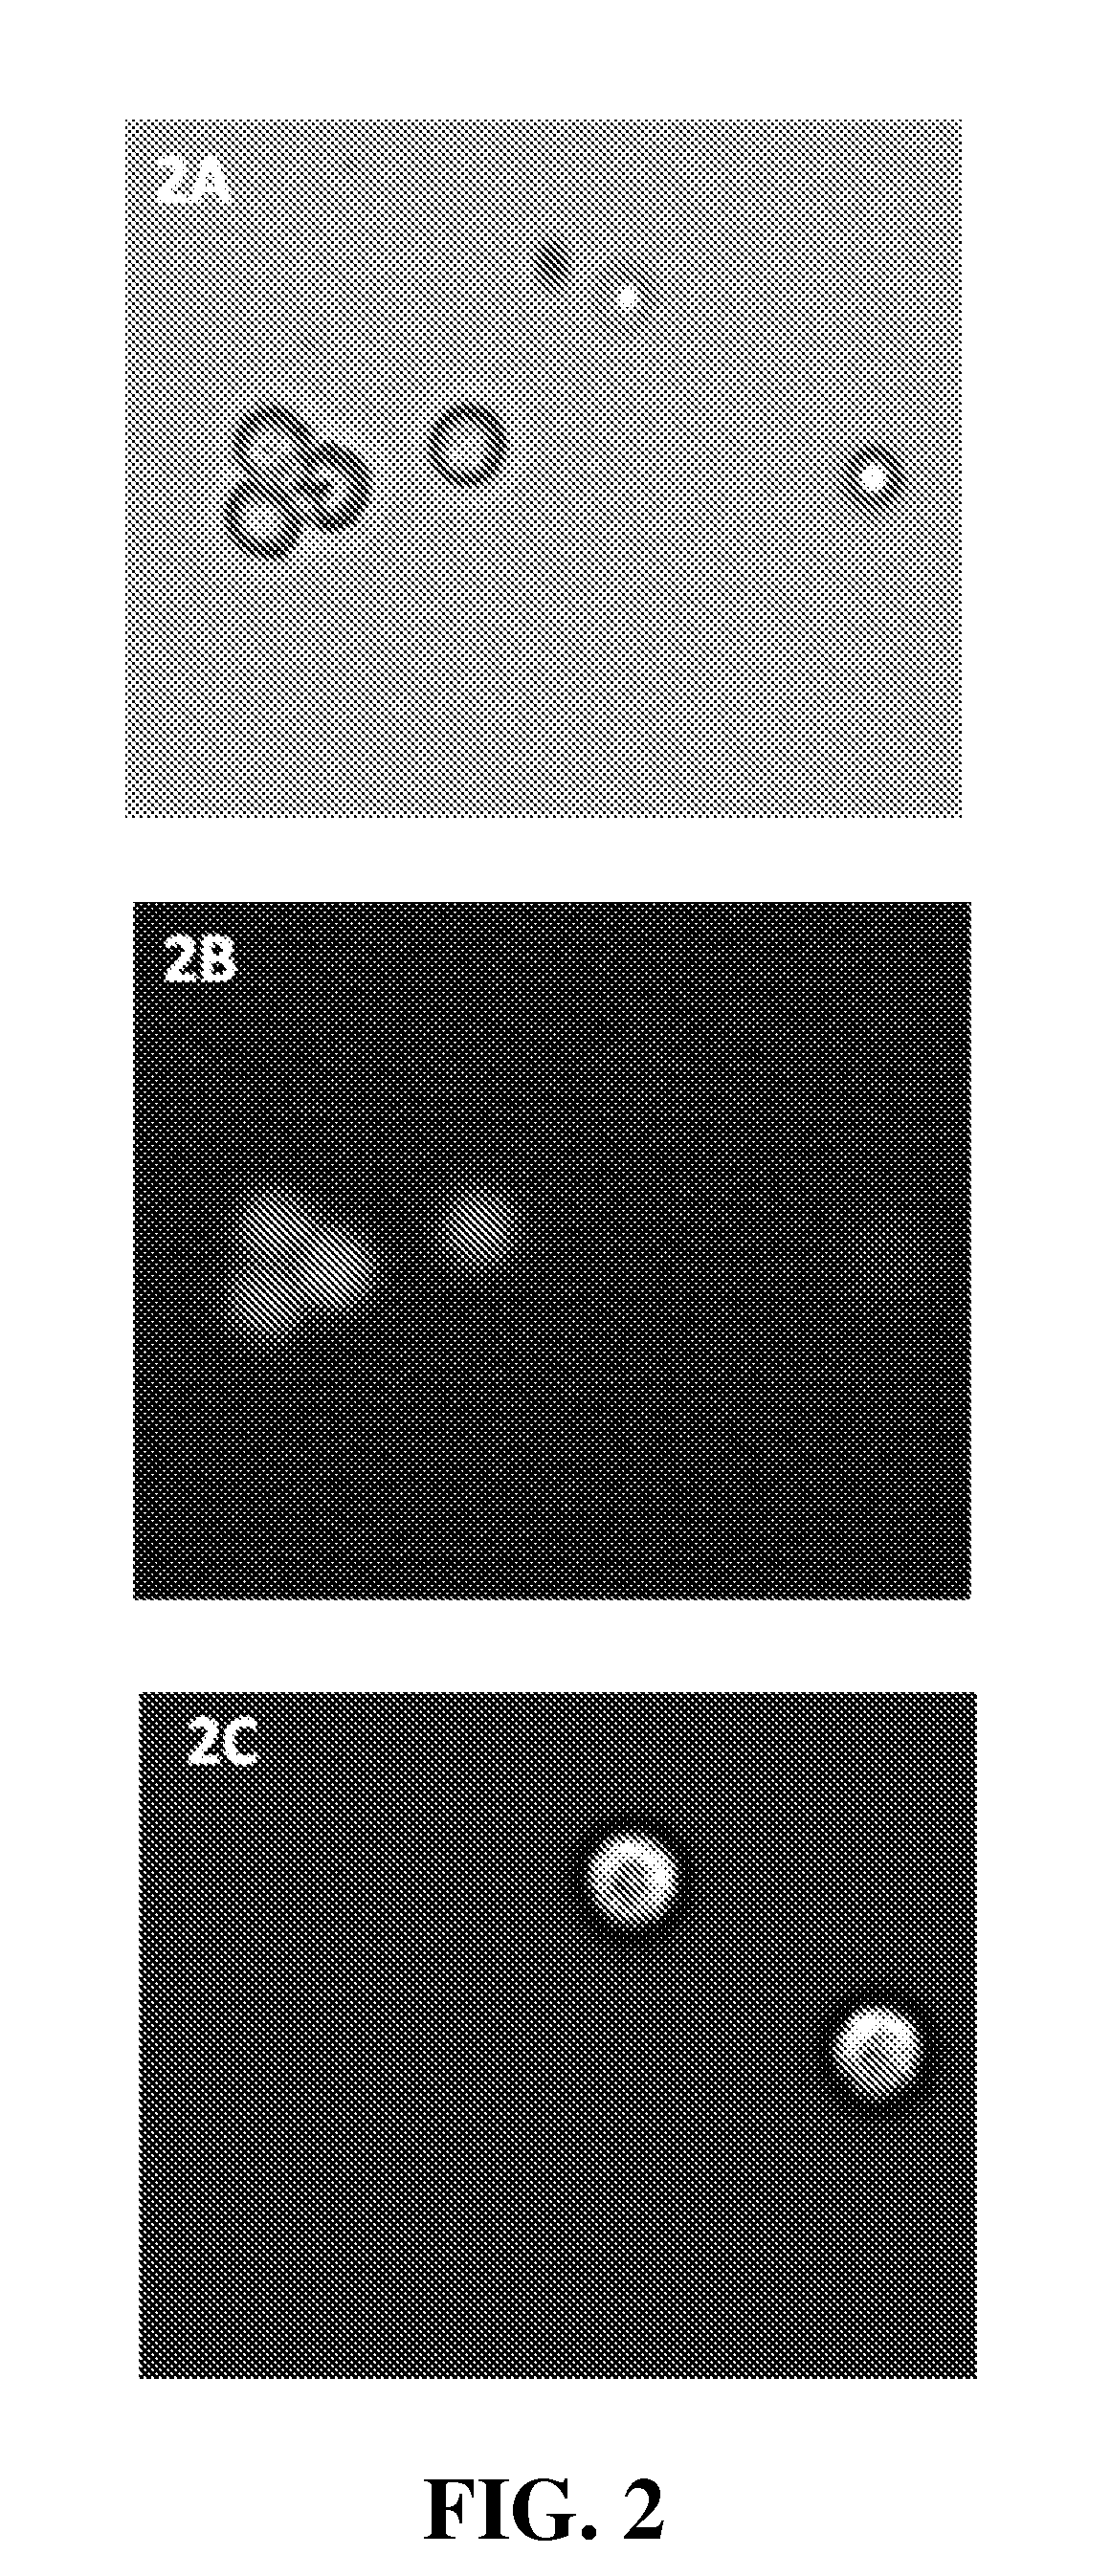 Method and kit for assessing viable cells